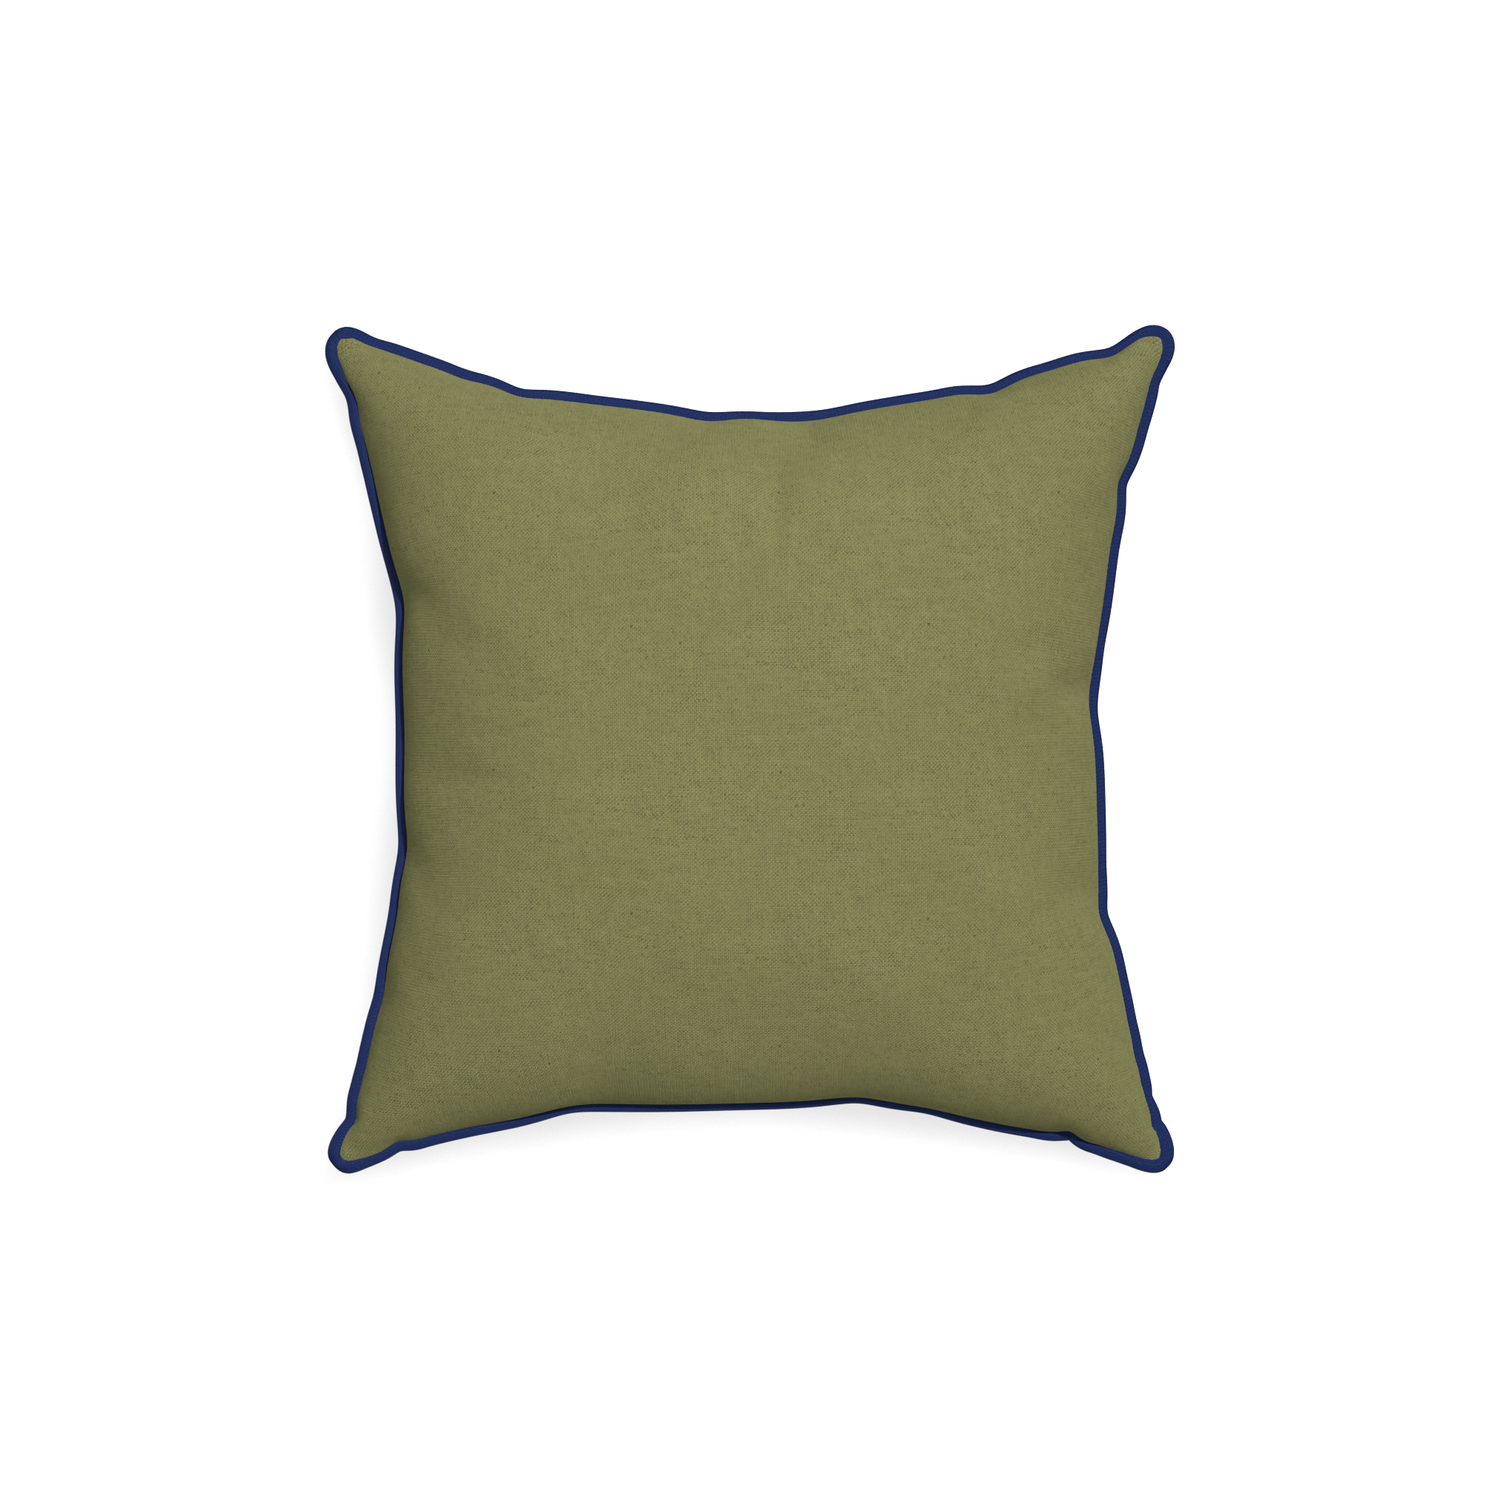 18-square moss custom moss greenpillow with midnight piping on white background